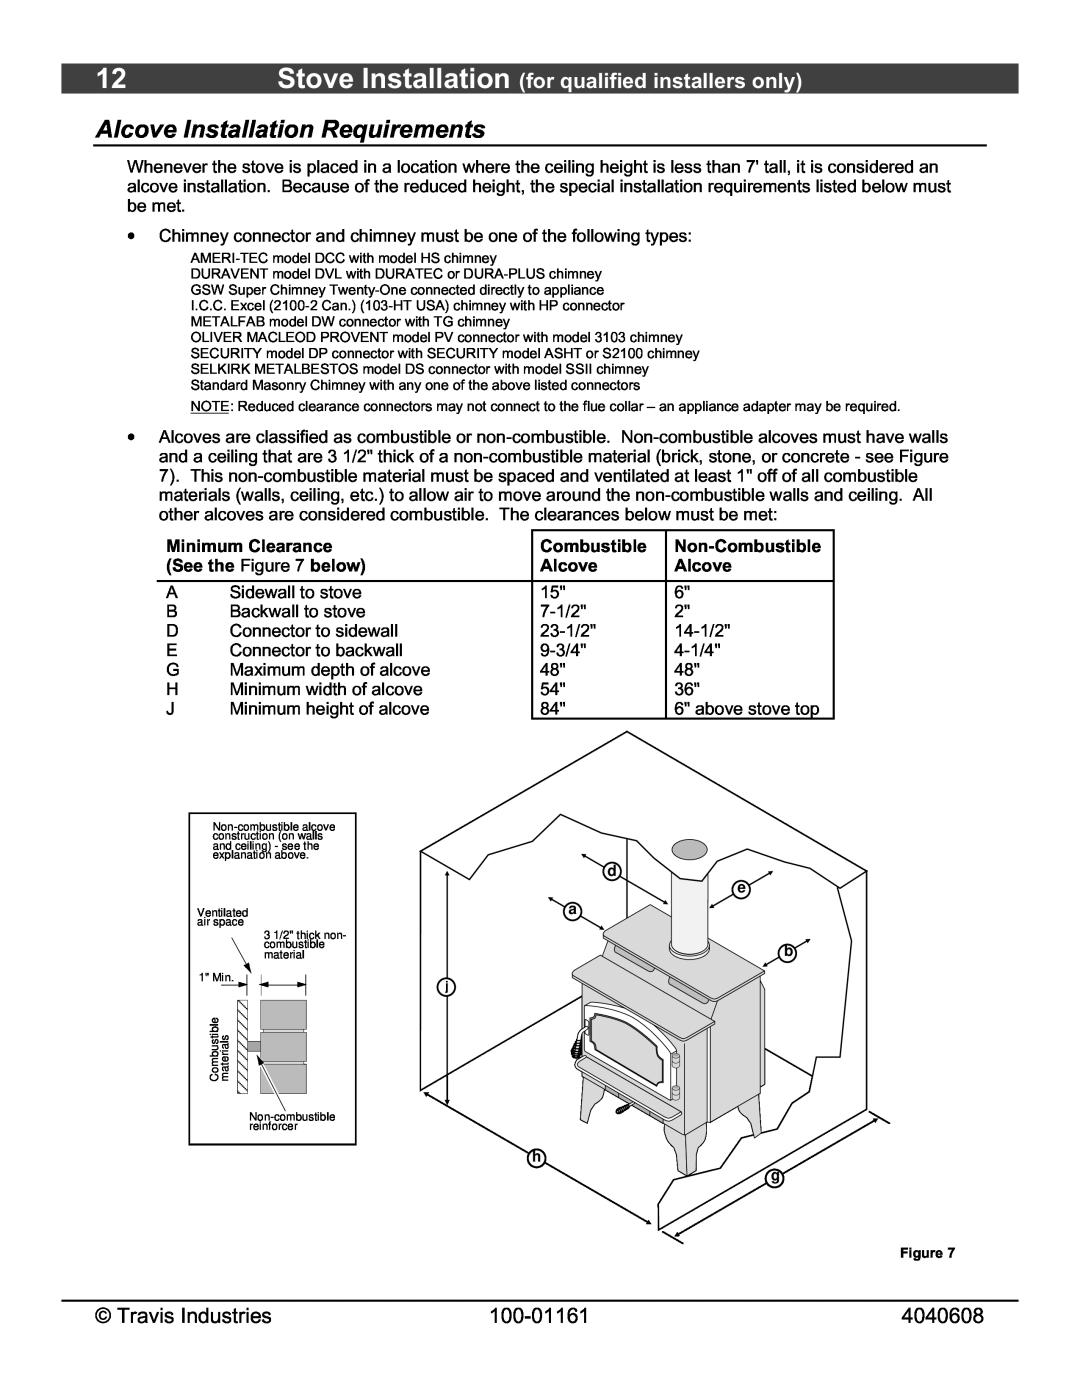 Lopi Endeavor Alcove Installation Requirements, Stove Installation for qualified installers only, Travis Industries 